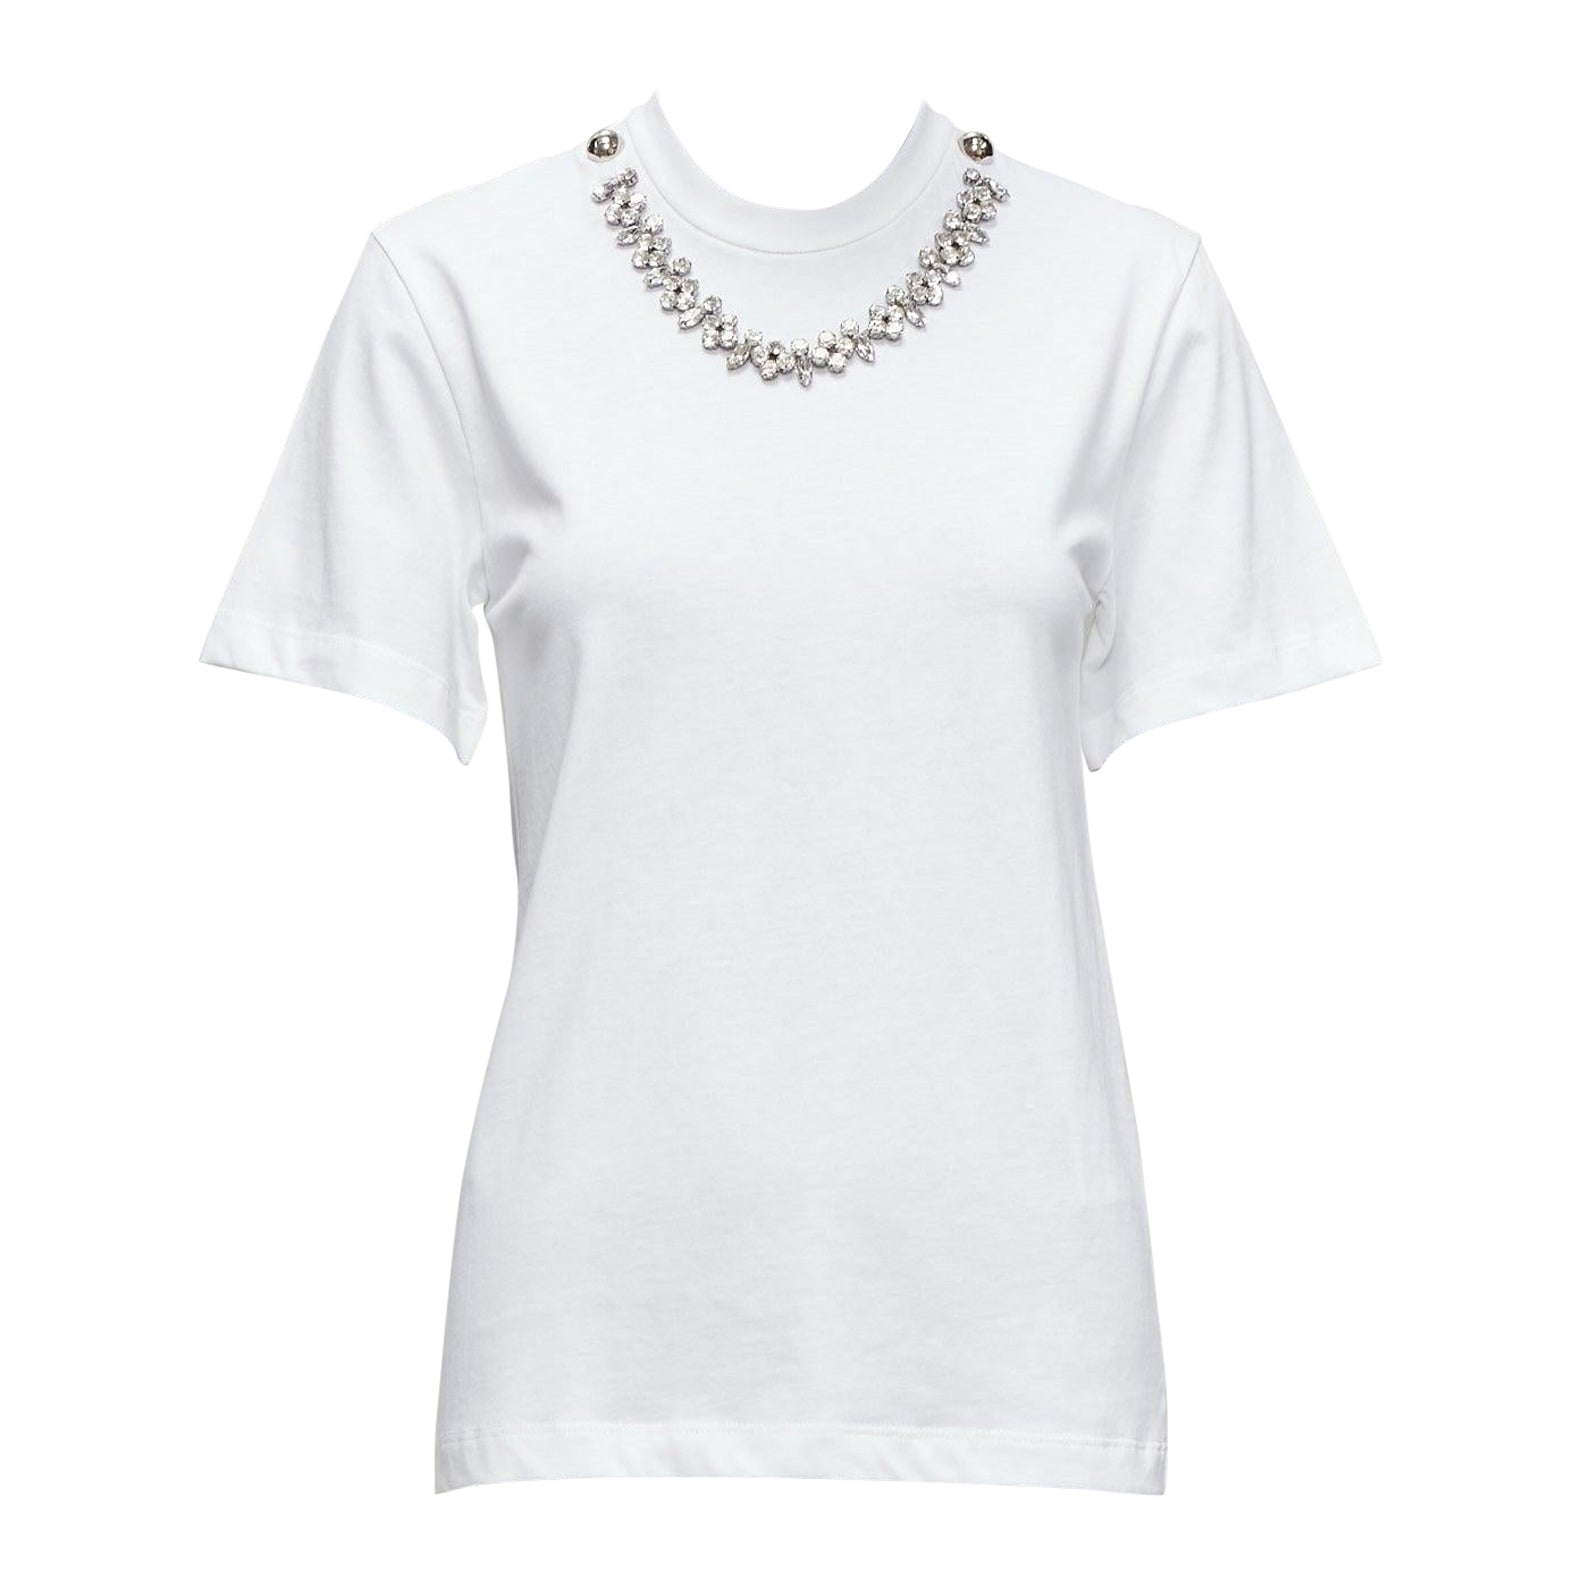 CHRISTOPHER KANE crystal rhinestone dome stud necklace white cotton tshirt XS For Sale